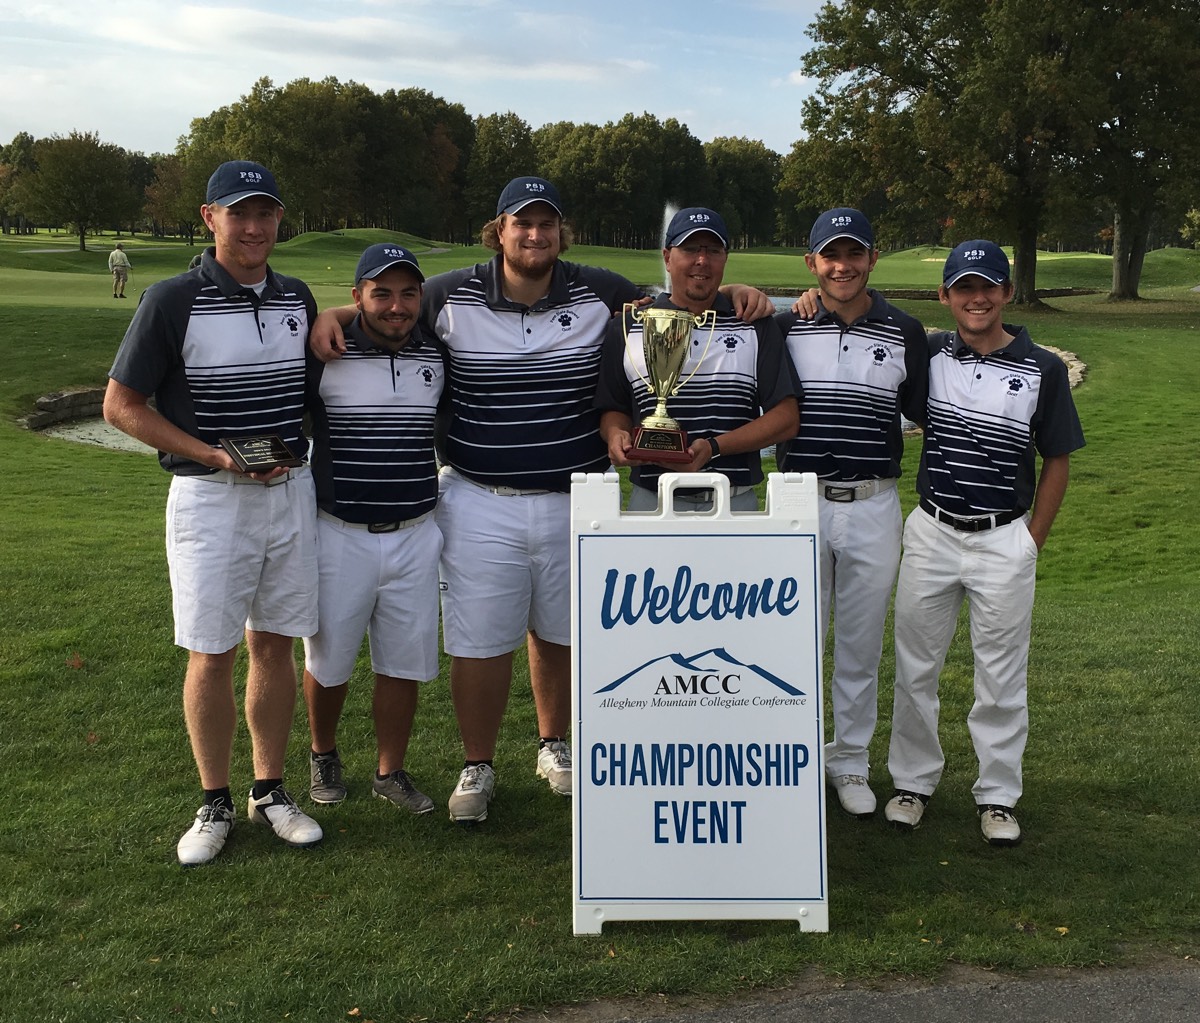 AMCC Championships All Came Down to GamePlanning - Instructional ...